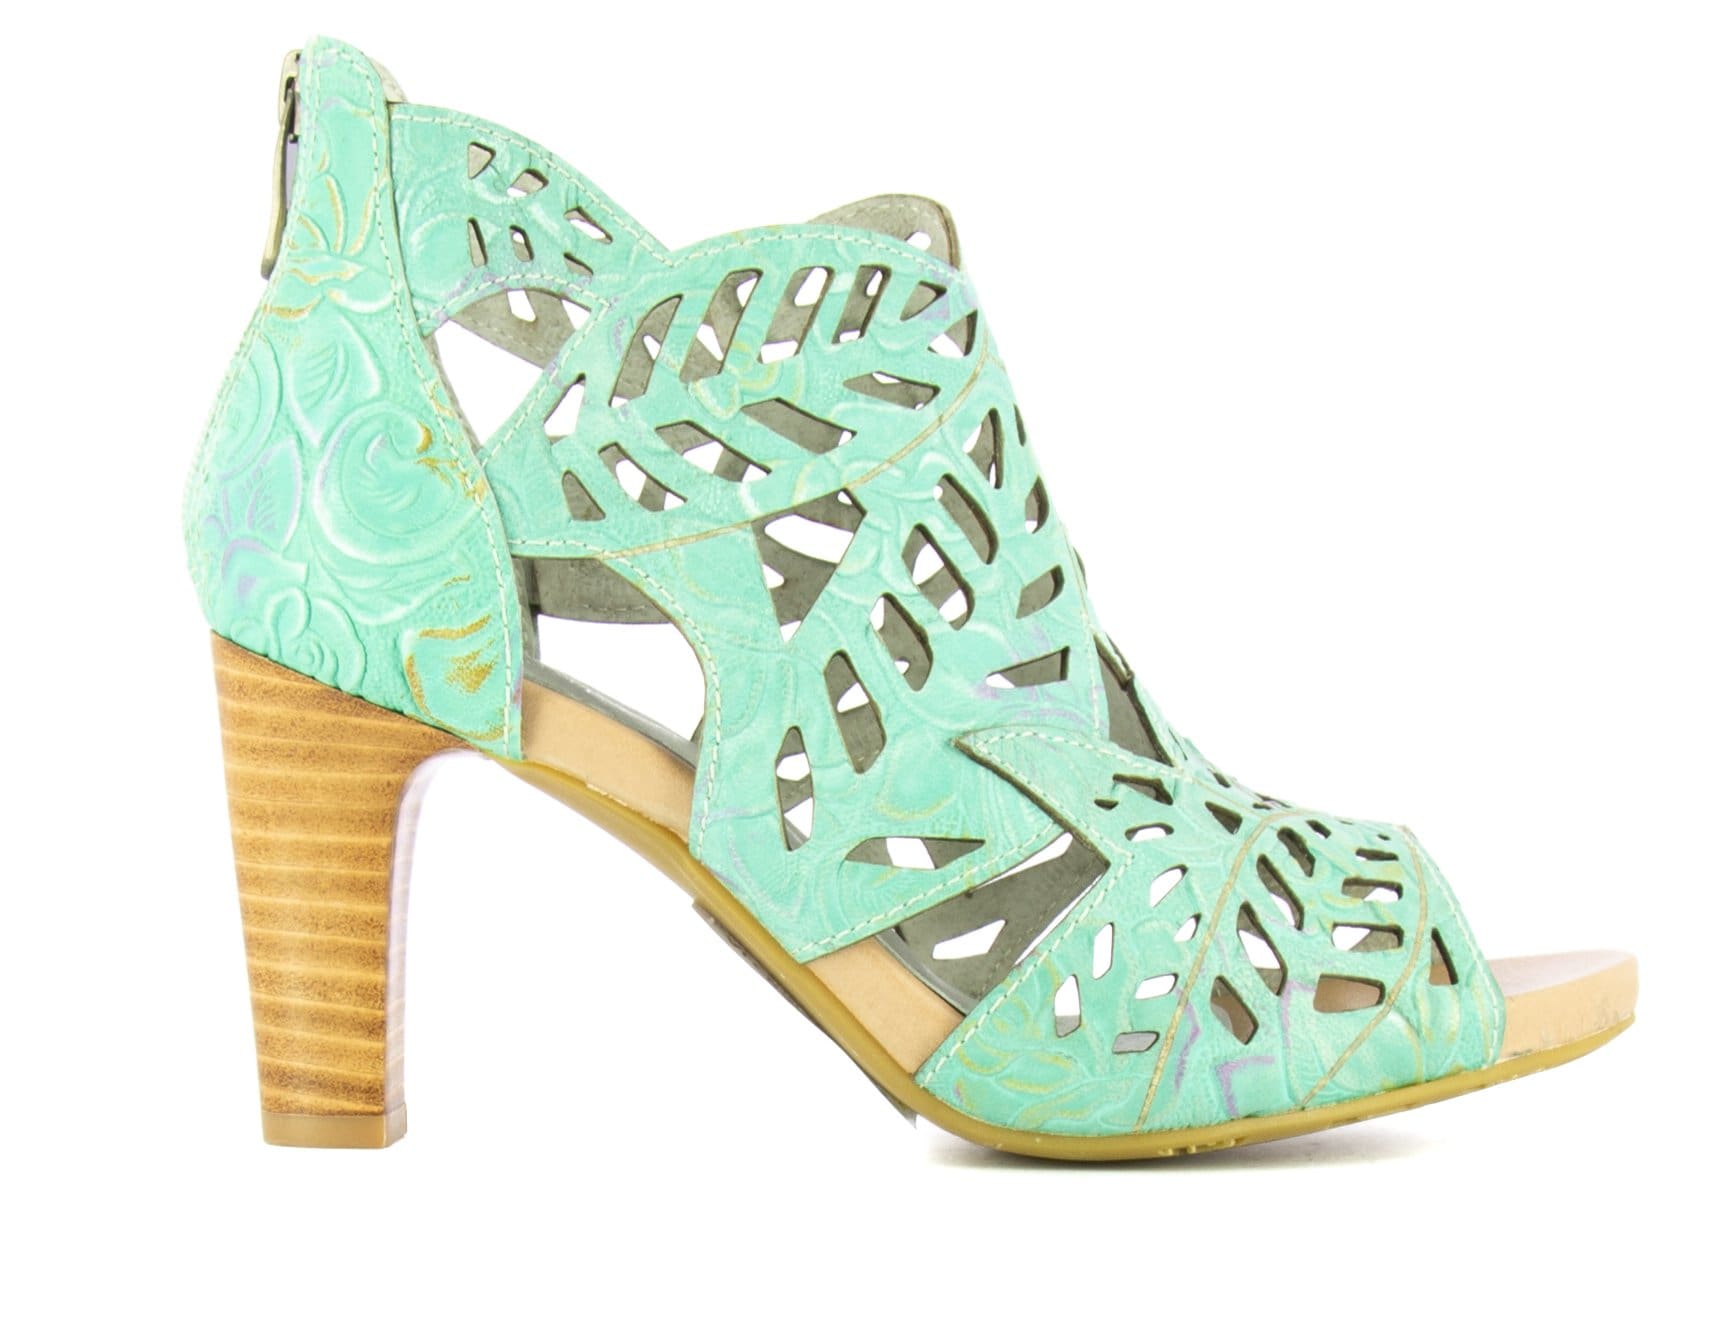 Chaussures ALCBANEO 242 - 35 / TURQUOISE - Sandale